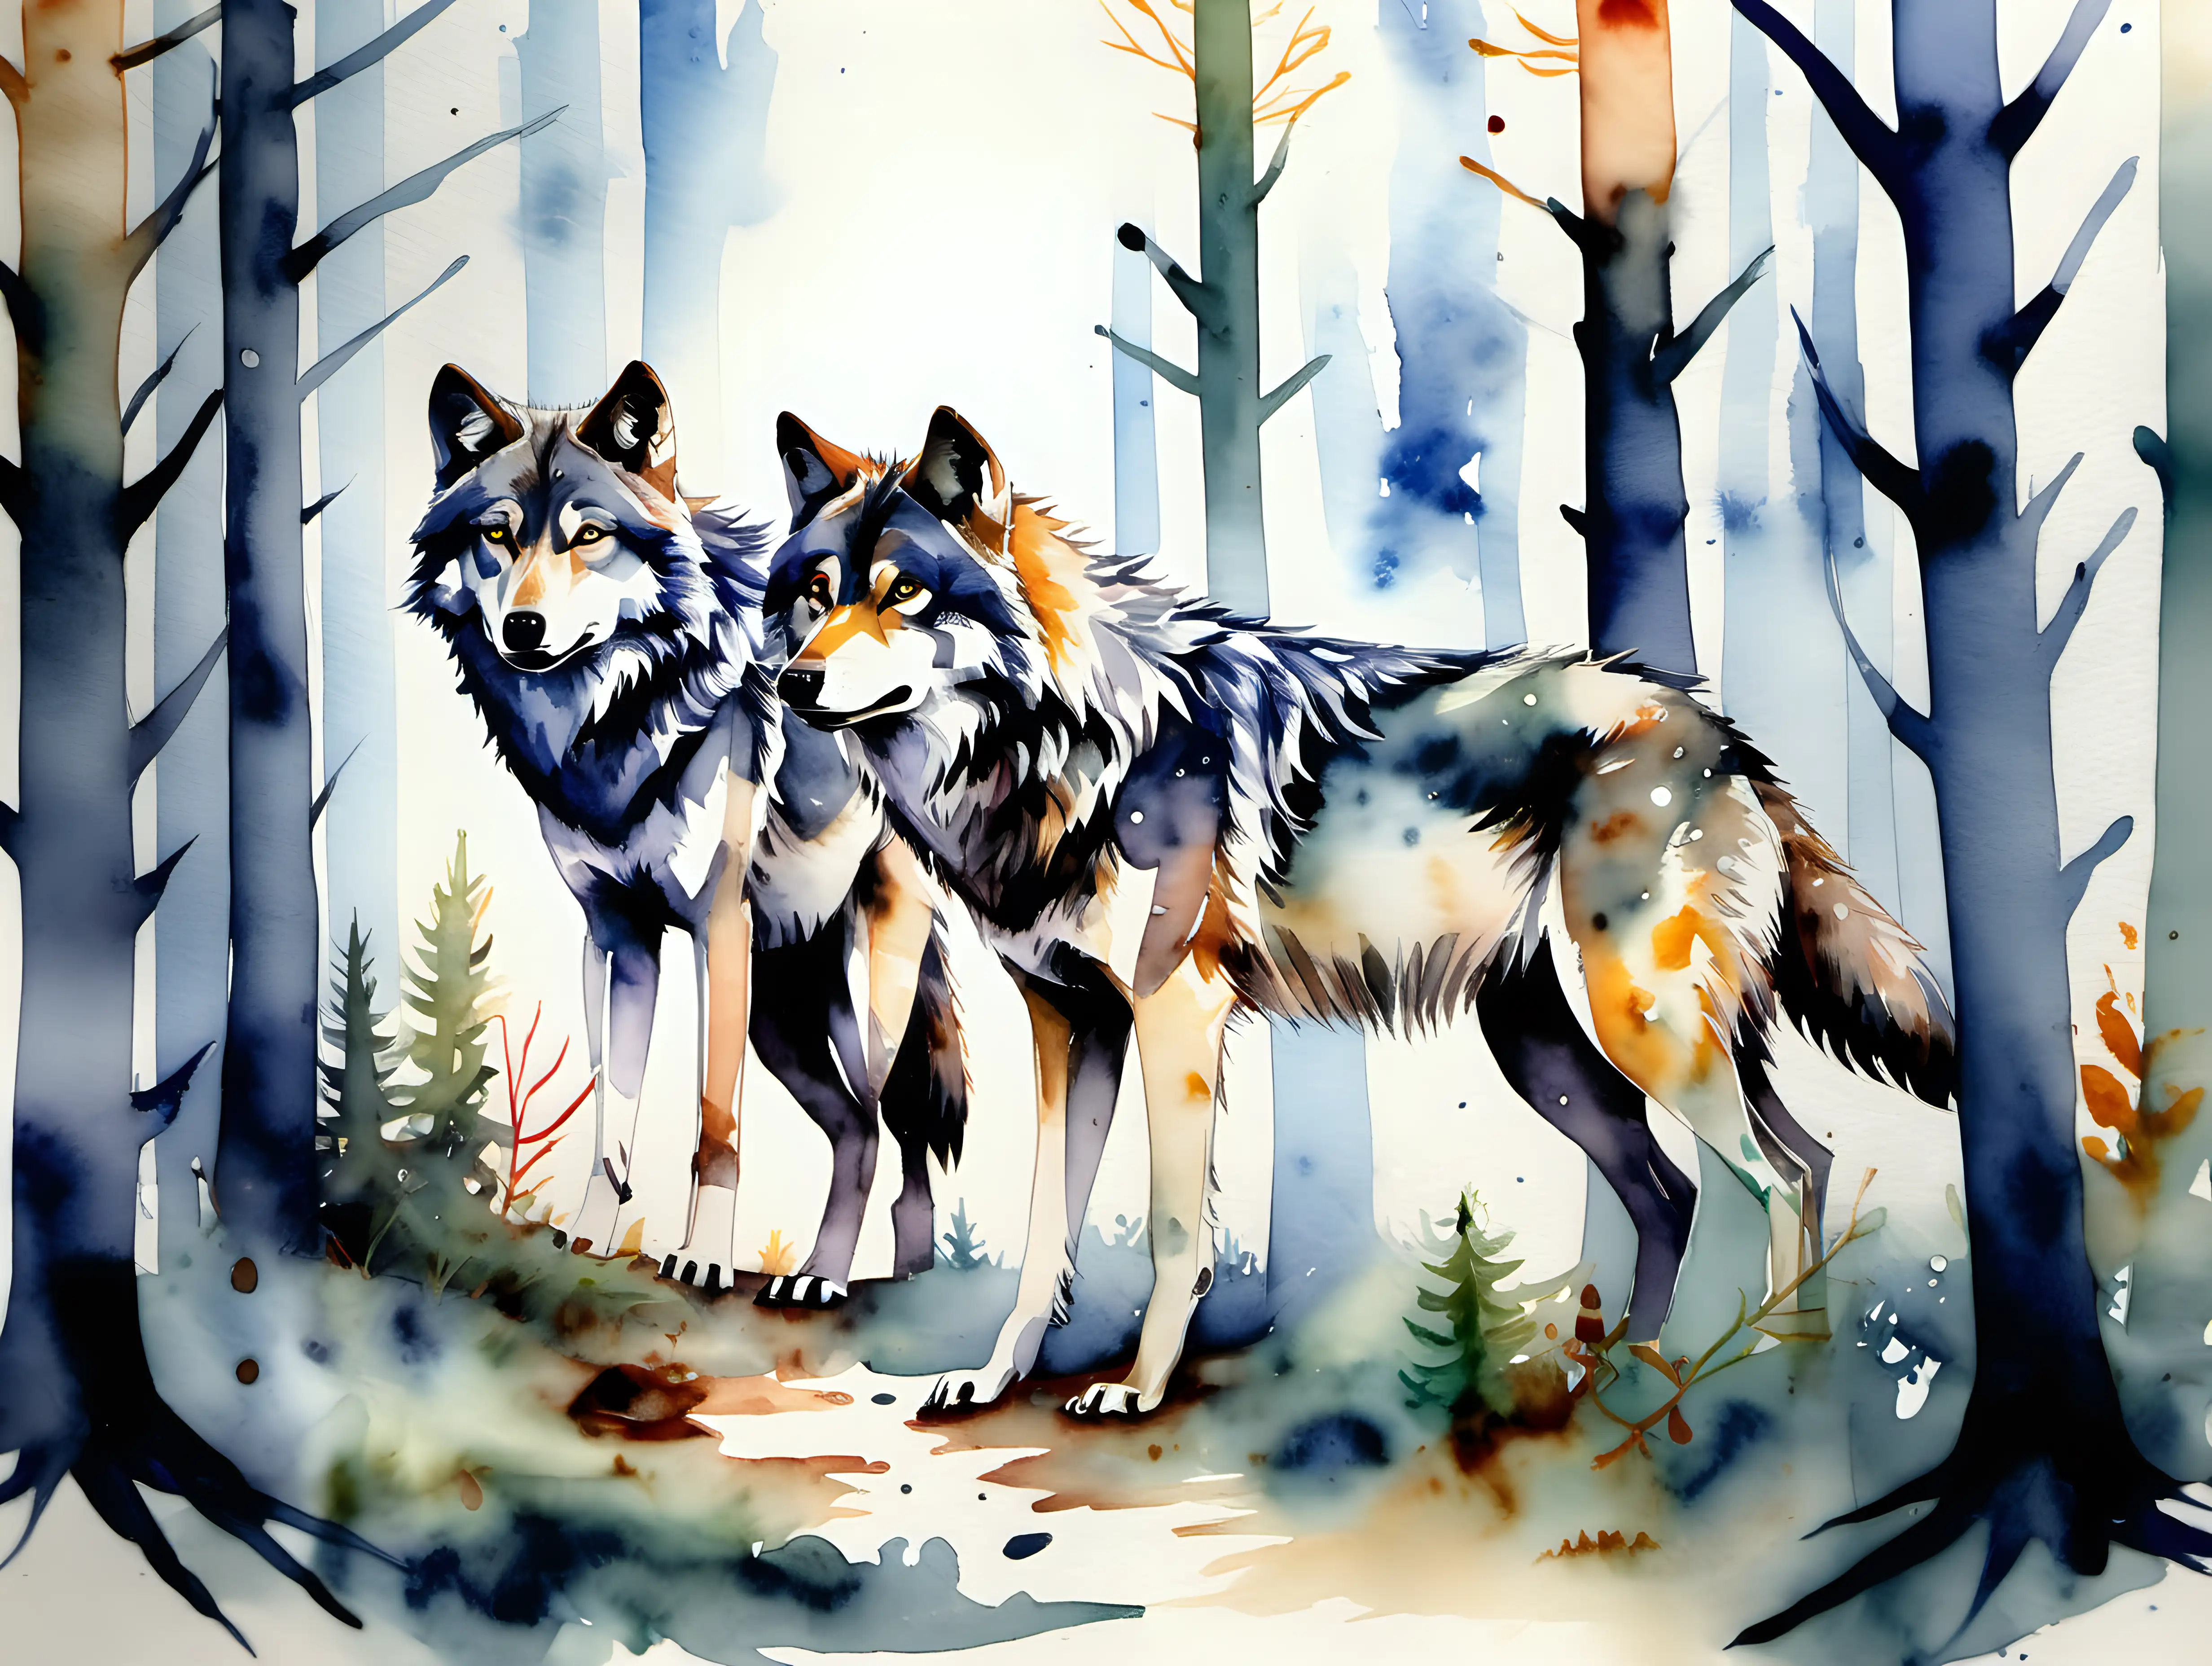 watercolour wolves in the forest

